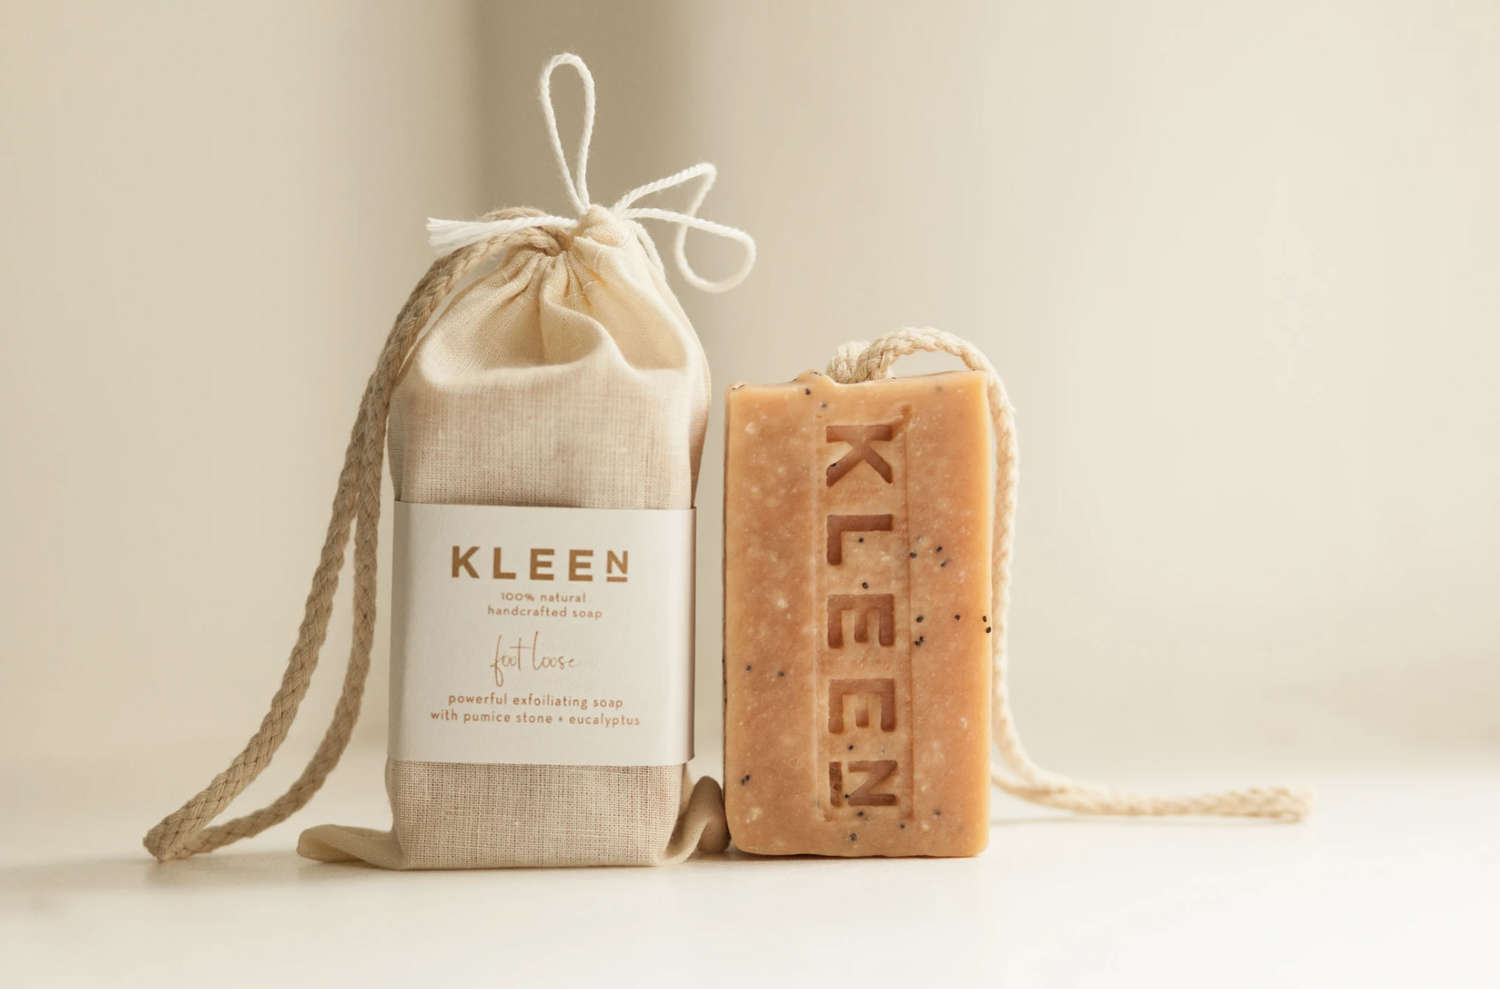 Foot Loose - Kleen 100% Natural handcrafted soap on a rope - 160g